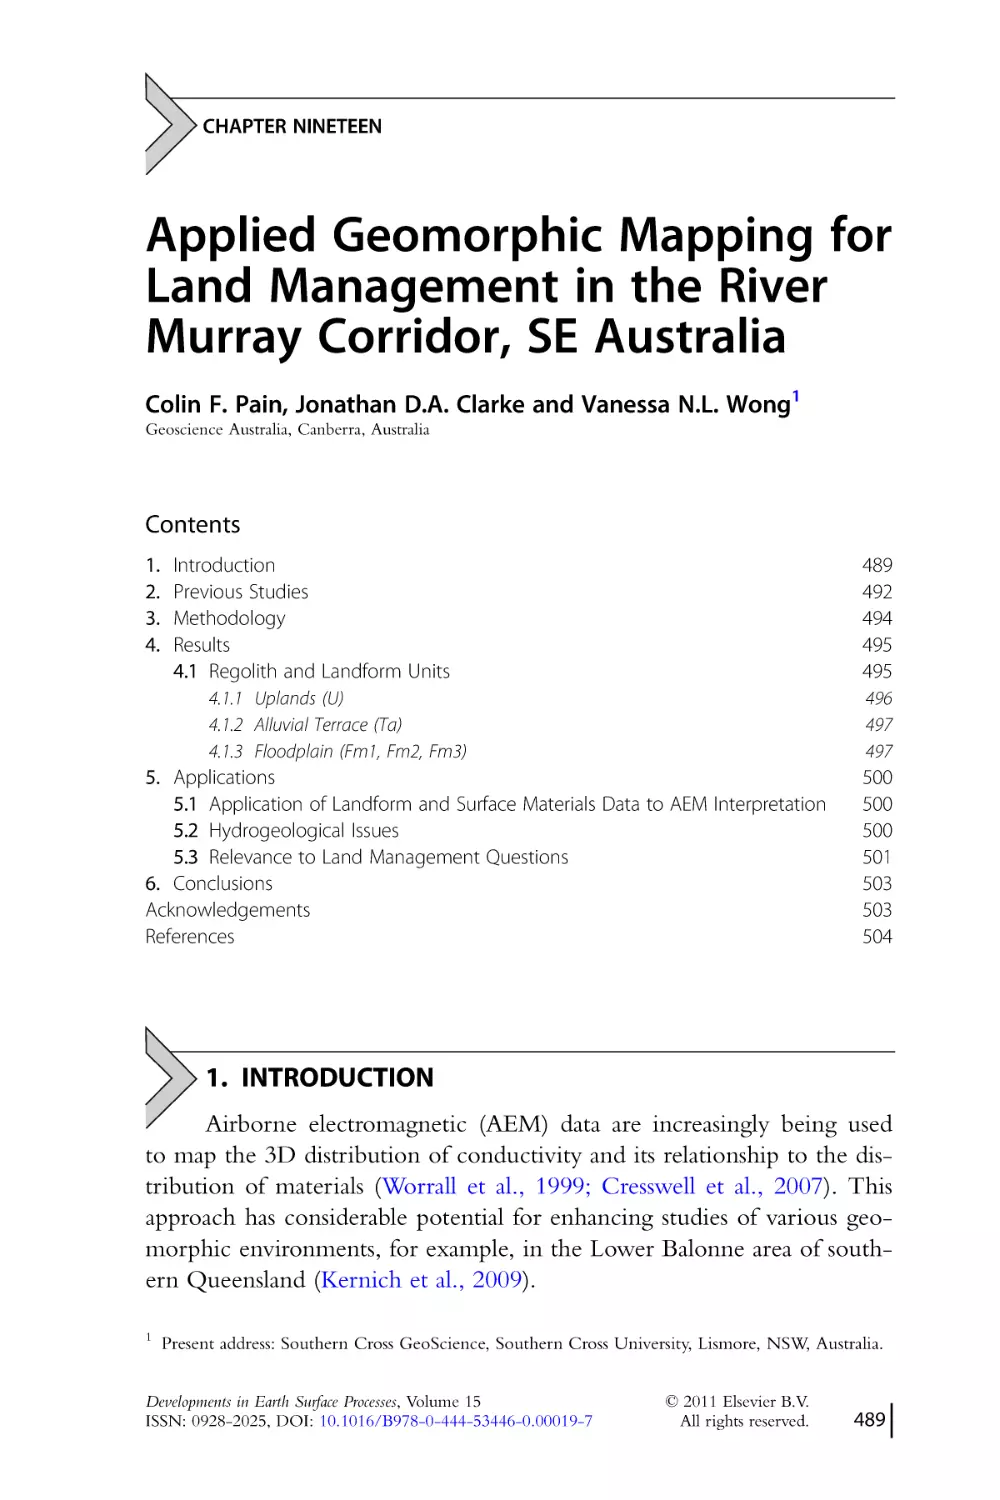 CHAPTER NINETEEN.
Applied Geomorphic Mapping for
Land Management in the River
Murray Corridor, SE Australia
1. Introduction